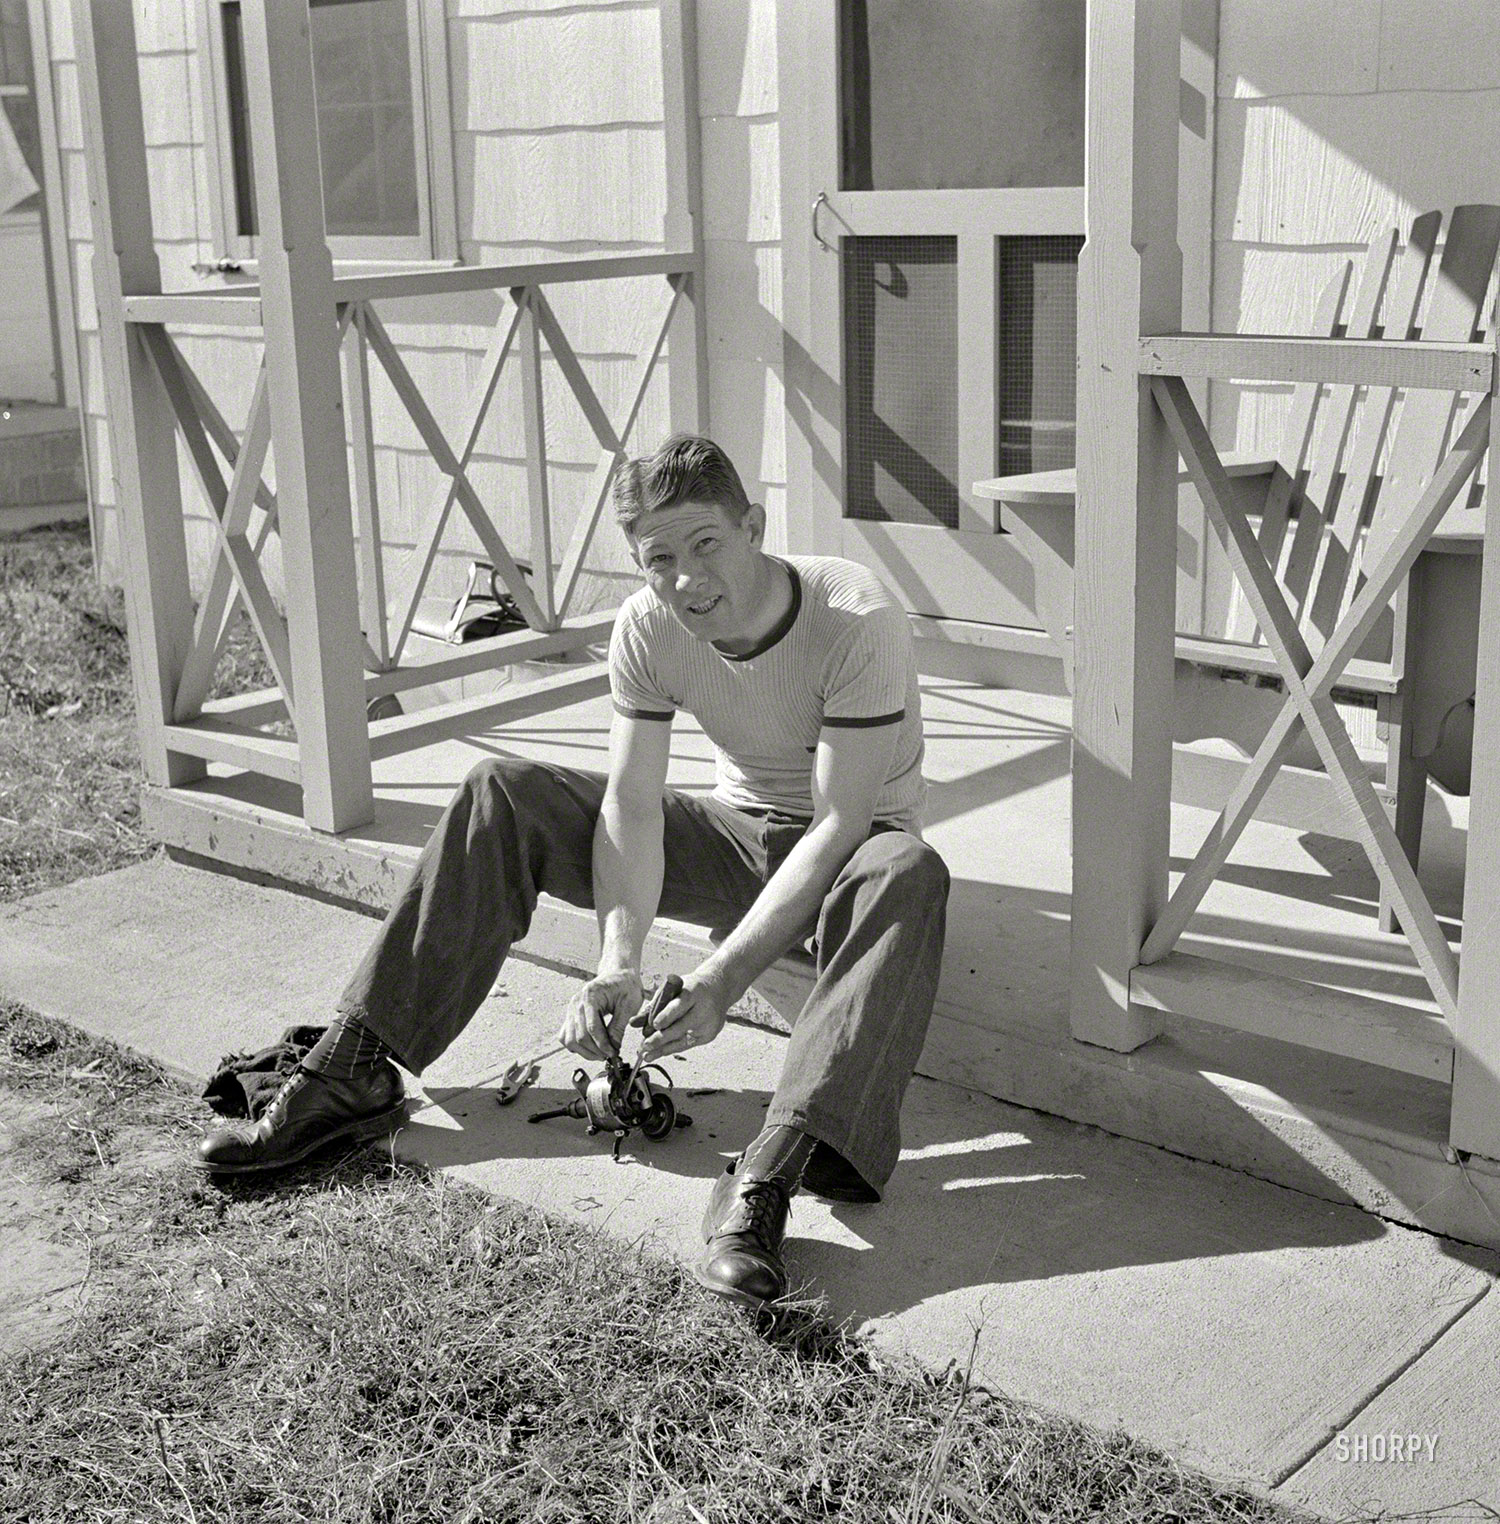 October 1941. "Radford, Virginia. Sunset Village, Farm Security Administration housing project. Fred B. Williams from Savannah, Georgia, cleaning car distributor on the porch of his home, 803 9th Street." Medium format nitrate negative by Marion Post Wolcott. View full size.